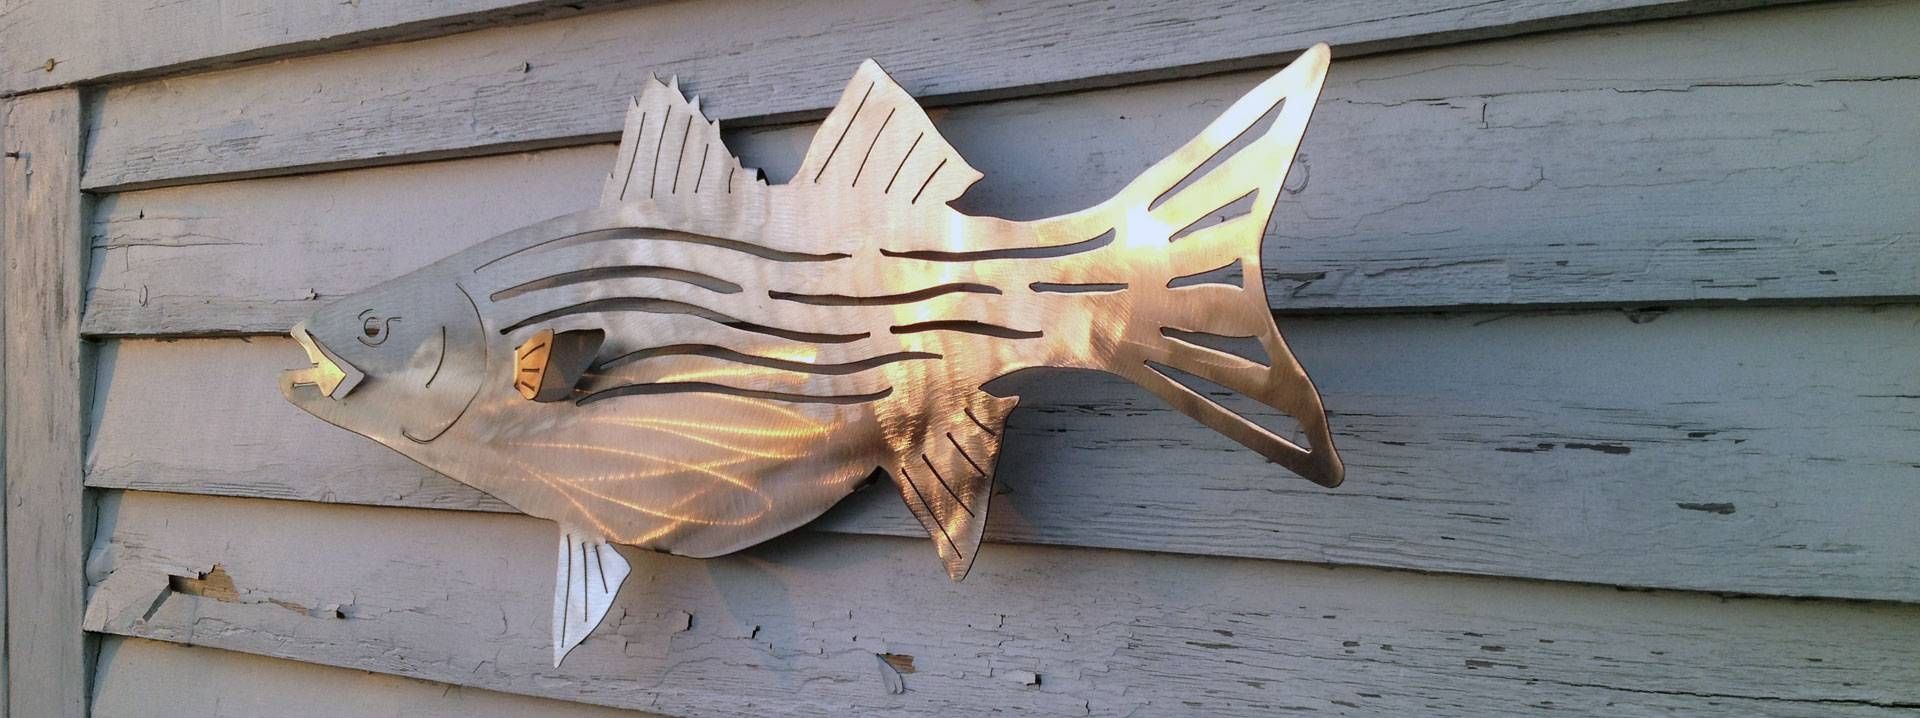 Metal Garden Sculptures For Sale | Home Outdoor Decoration Pertaining To Latest Stainless Steel Fish Wall Art (View 17 of 17)